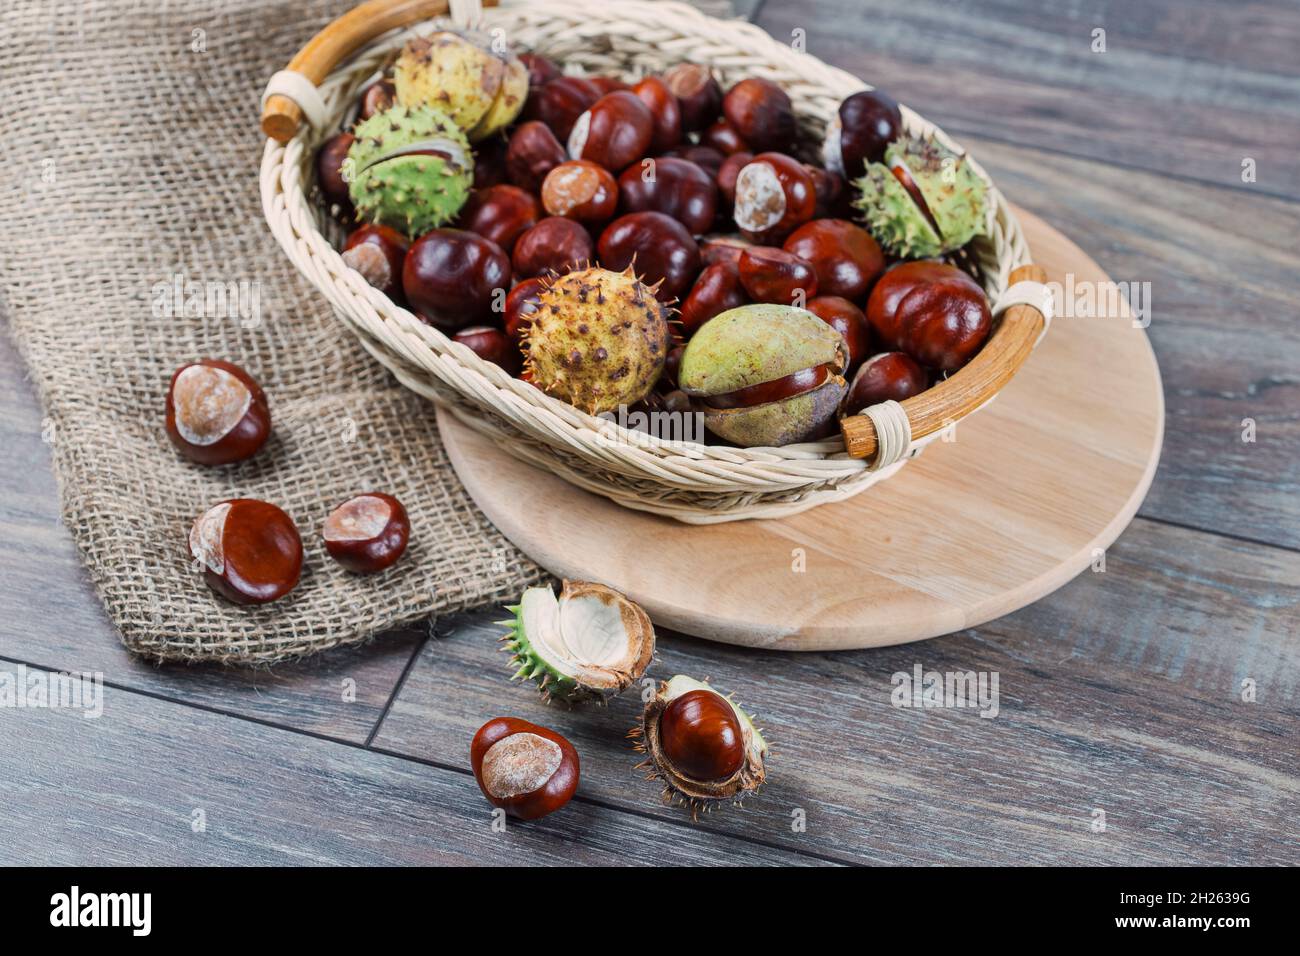 Close up view of Chestnuts in a basket on a wooden background. Stock Photo